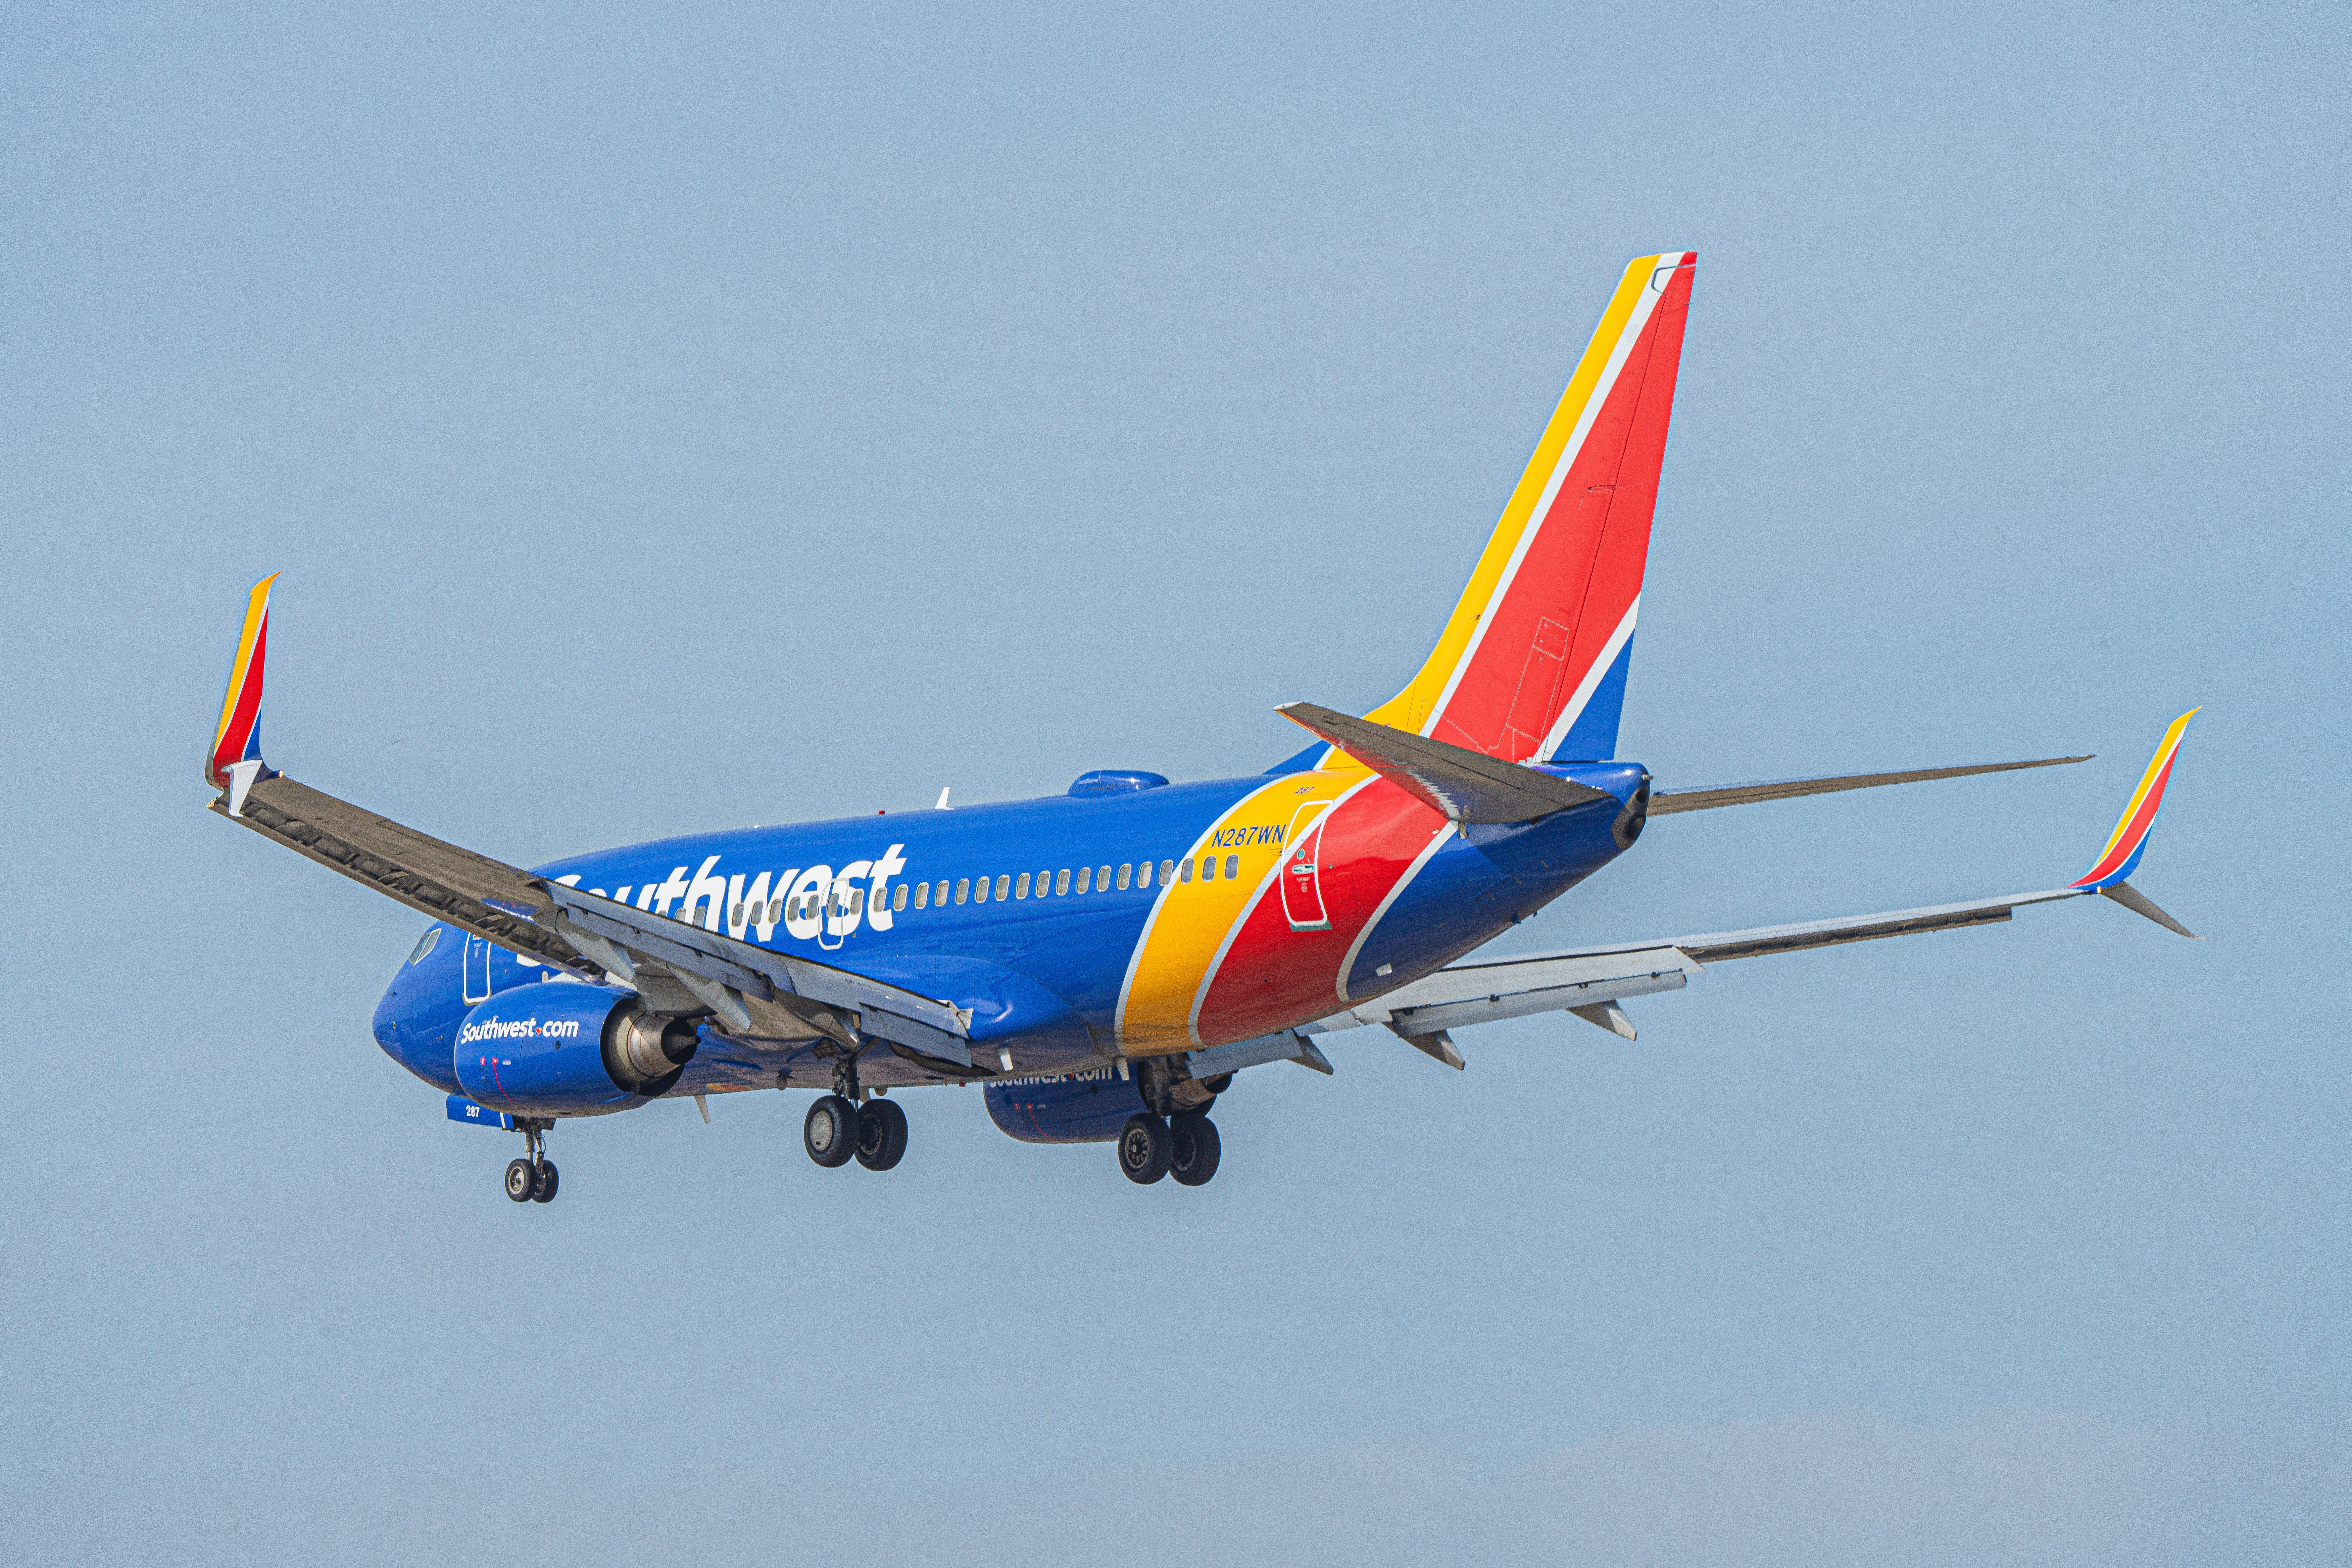 A Southwest Airlines Boeing 737-700 flying in the sky.